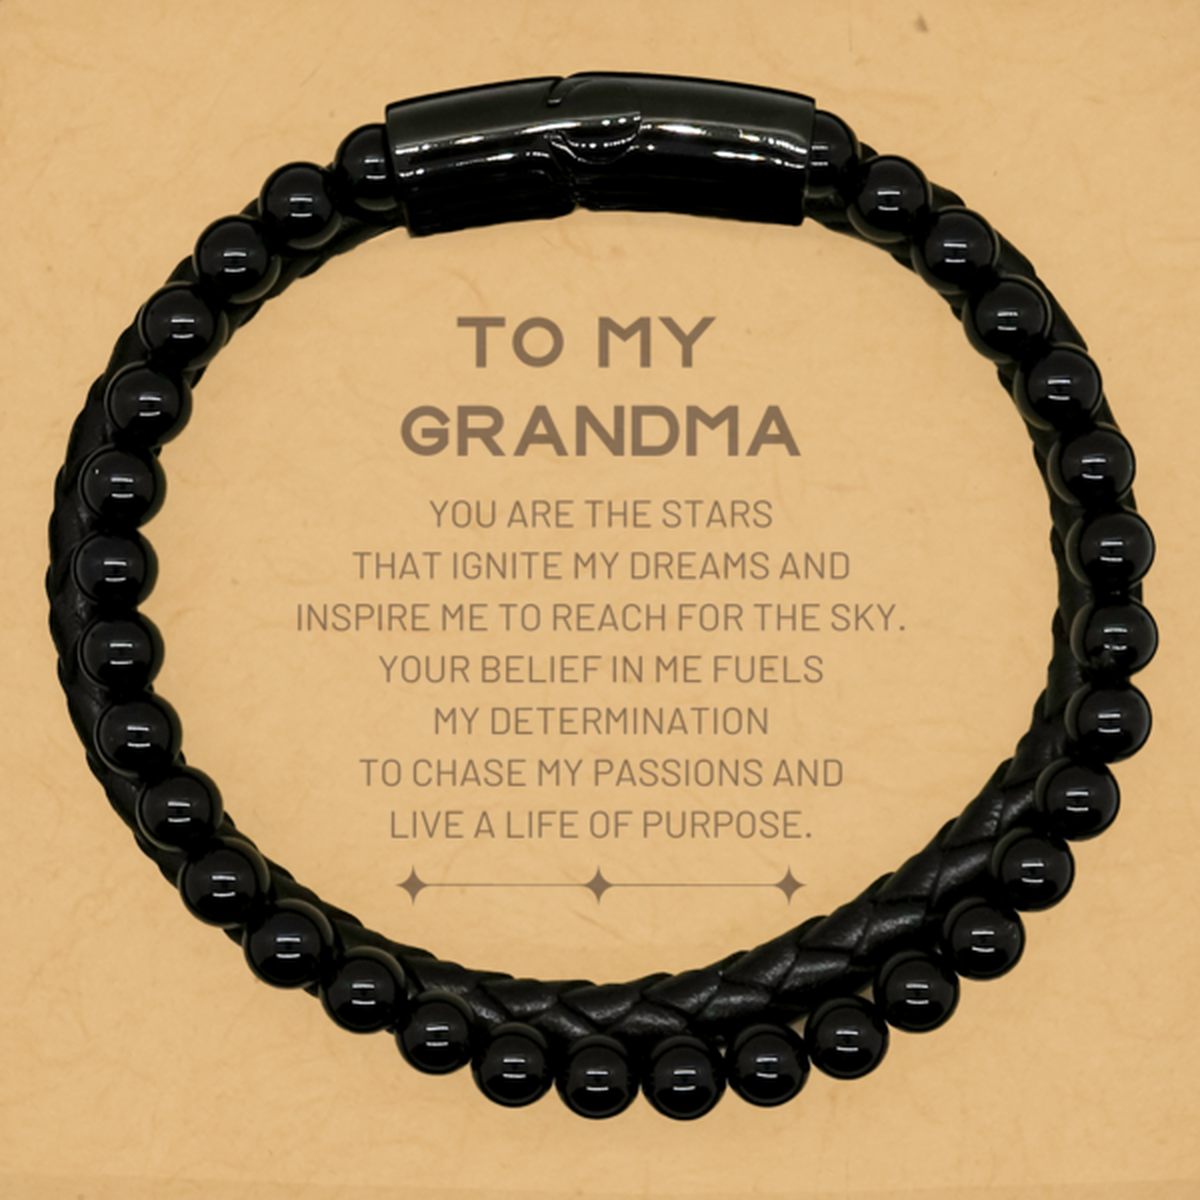 To My Grandma Stone Leather Bracelets, You are the stars that ignite my dreams and inspire me to reach for the sky, Birthday Unique Gifts For Grandma, Thank You Gifts For Grandma